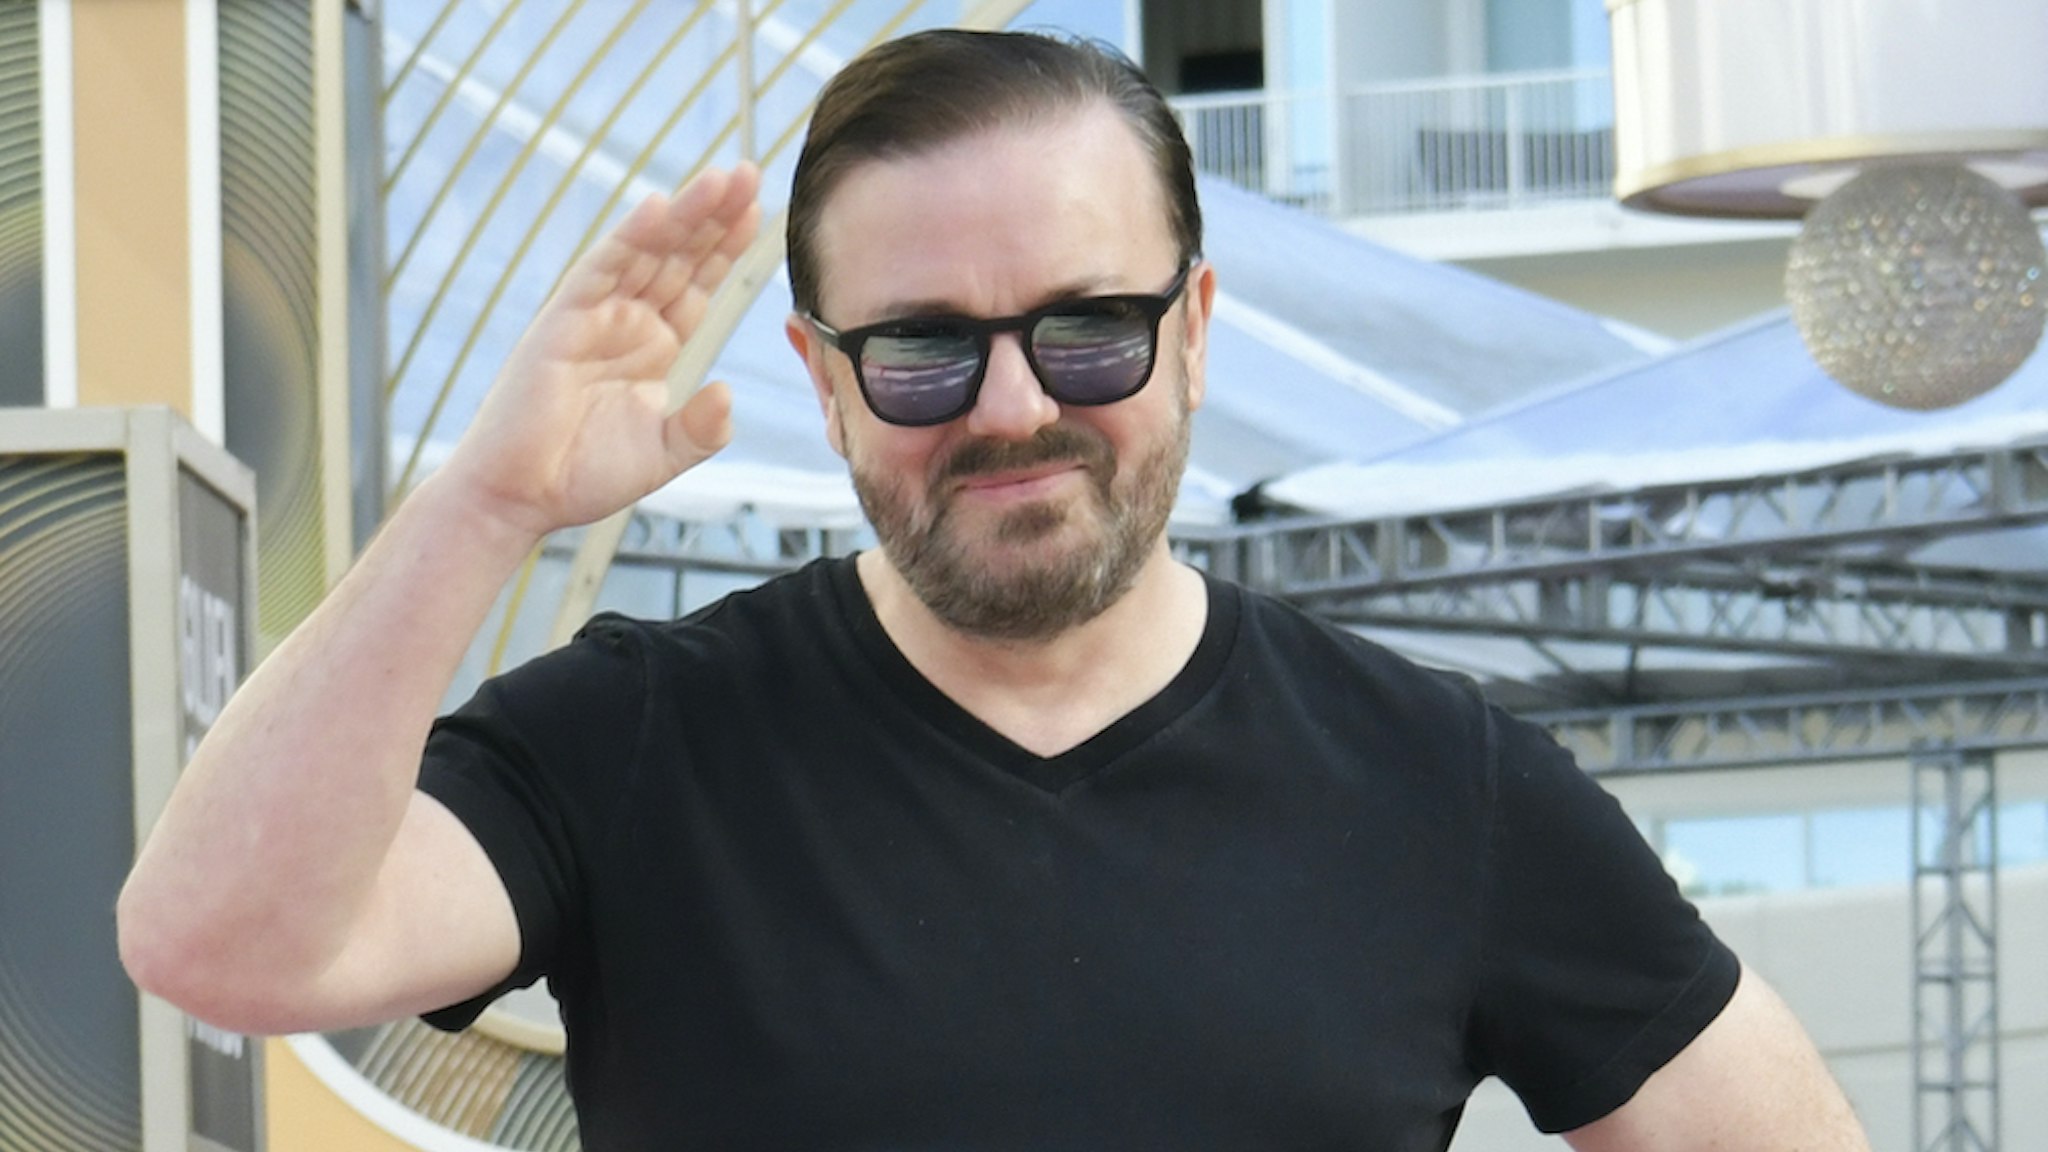 Ricky Gervais unloads on the gender fluid movement in a NSFW standup rant